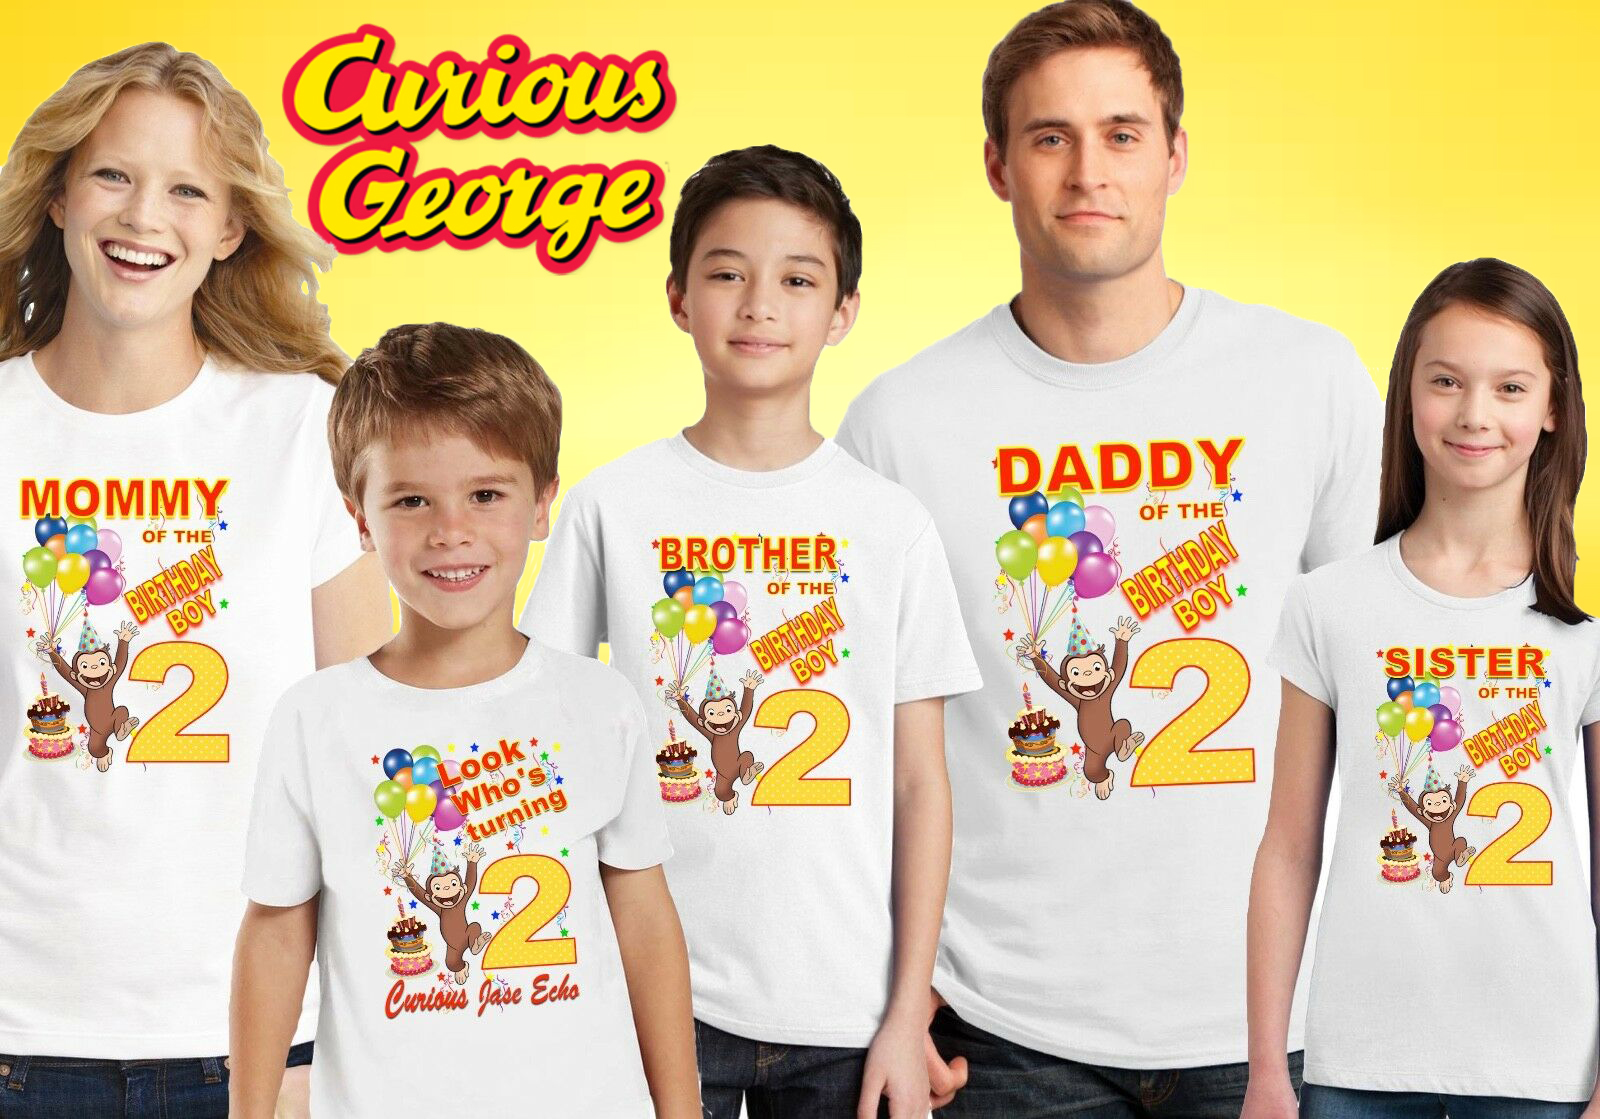 Personalized Curious George Birthday Shirt Set, Personalized Name and Age, Customized Curious George Family Shirts